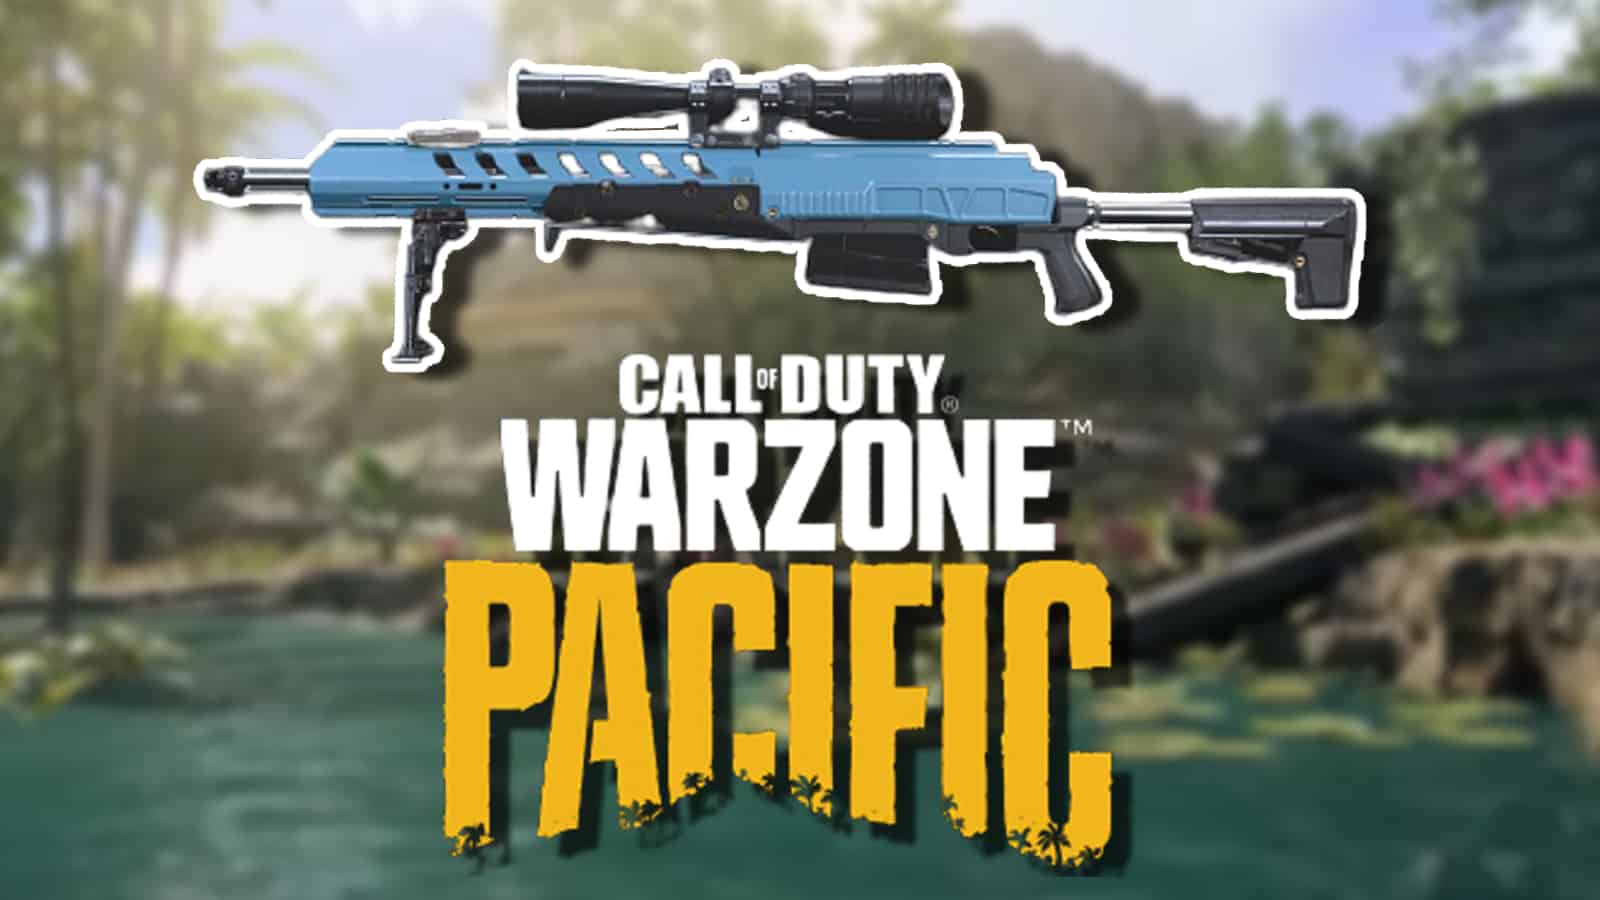 HDR in Warzone Pacific